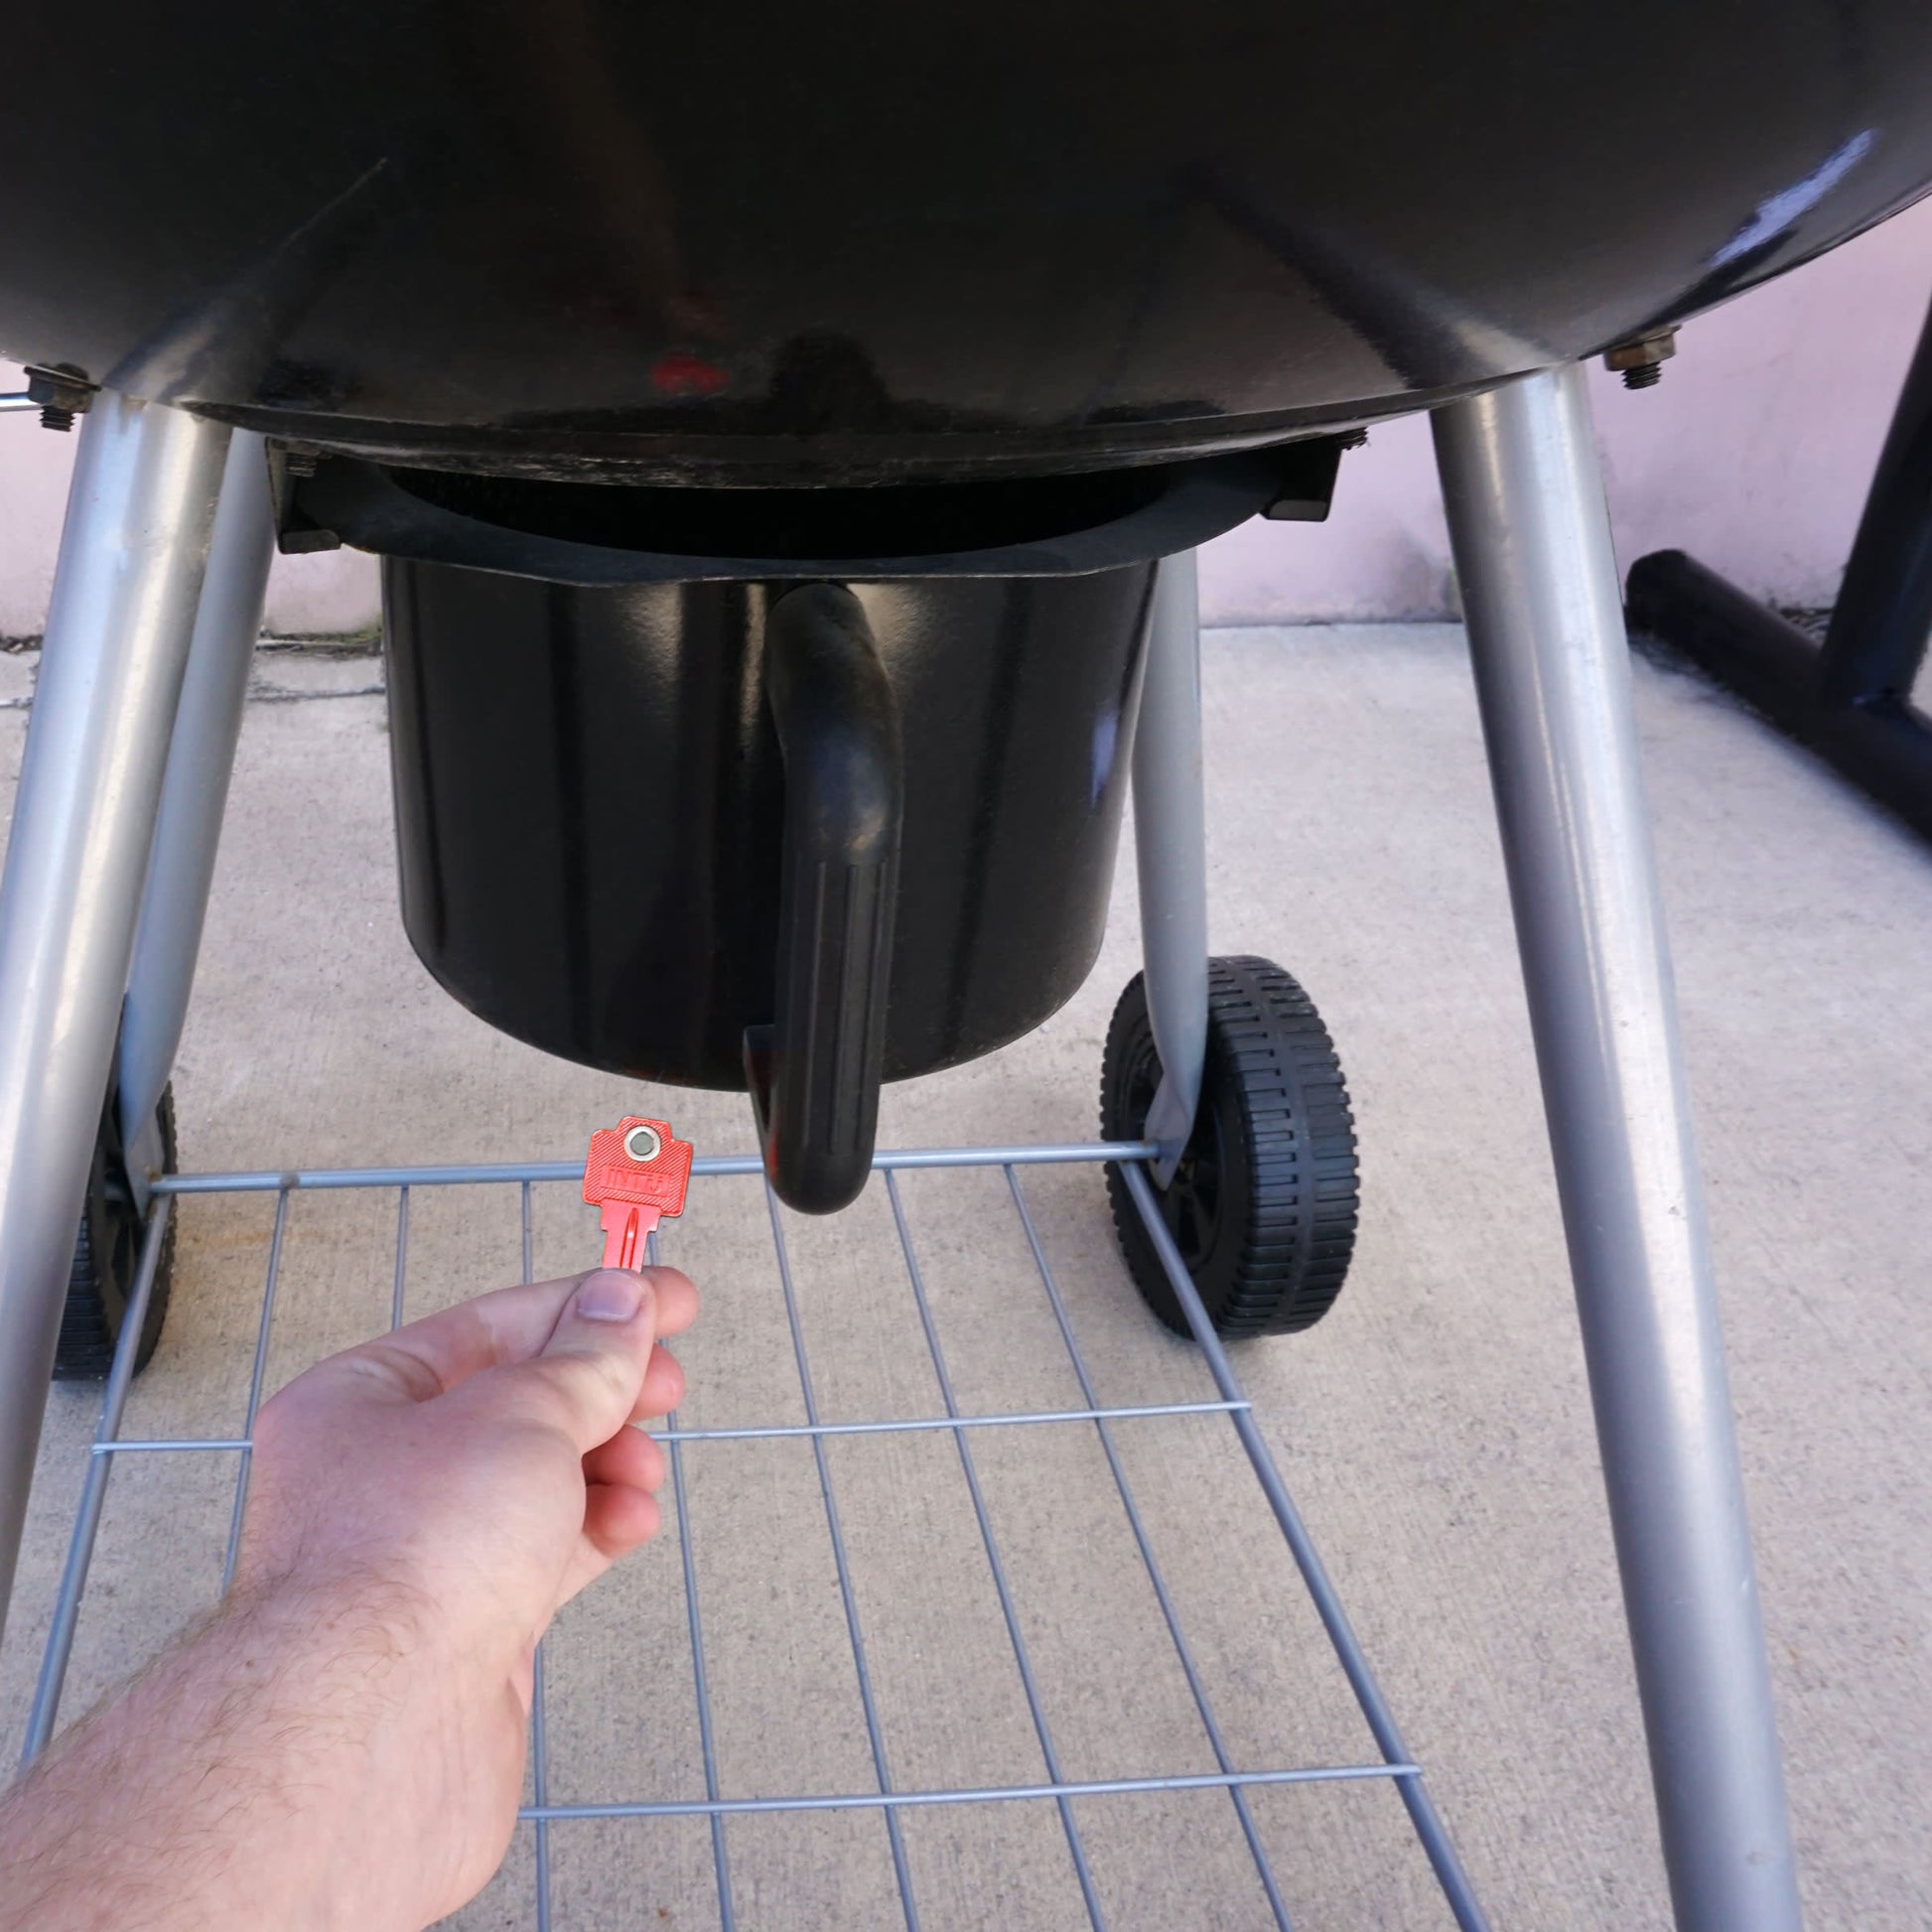 Load image into Gallery viewer, 50772 Magnetic Key, WR5-67 Red - Hand Holding Red Magnetic Key Beneath a Barbeque Grill